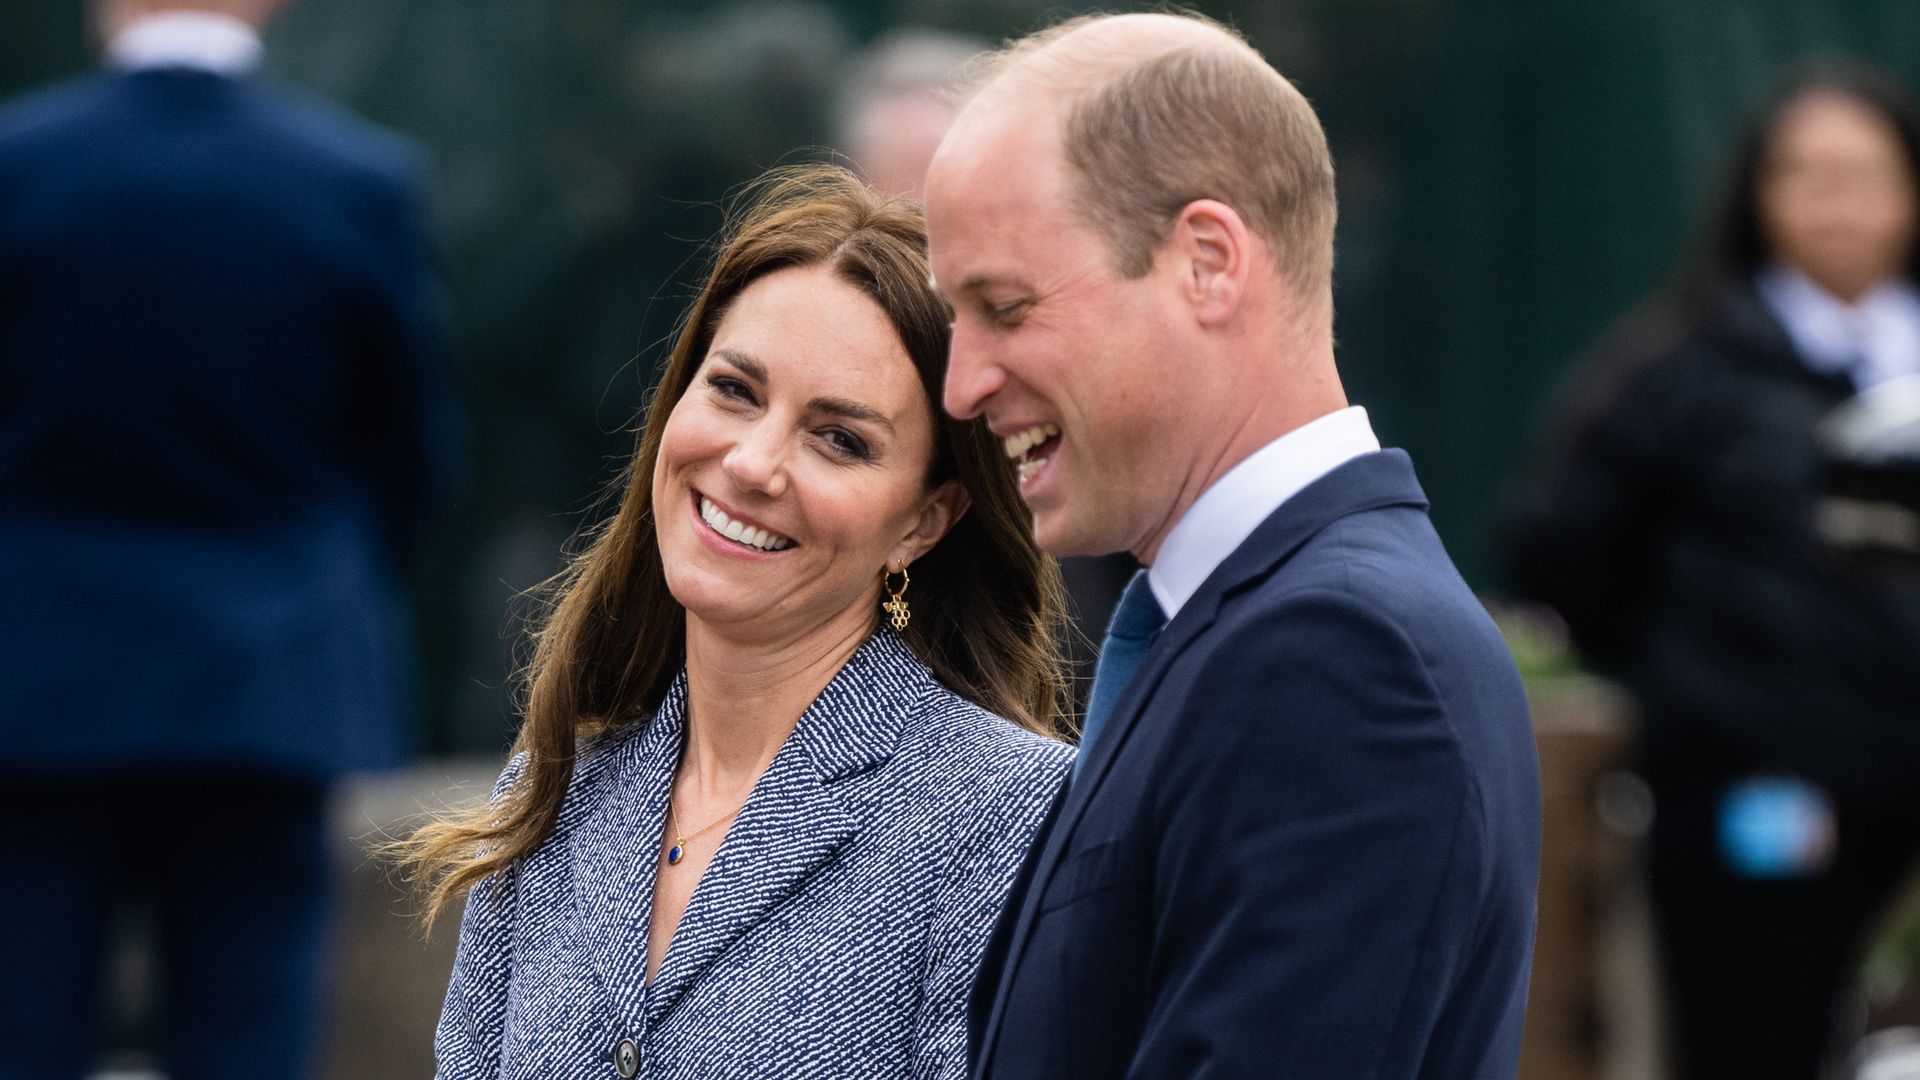 Prince William and Kate Middleton talk to crowds